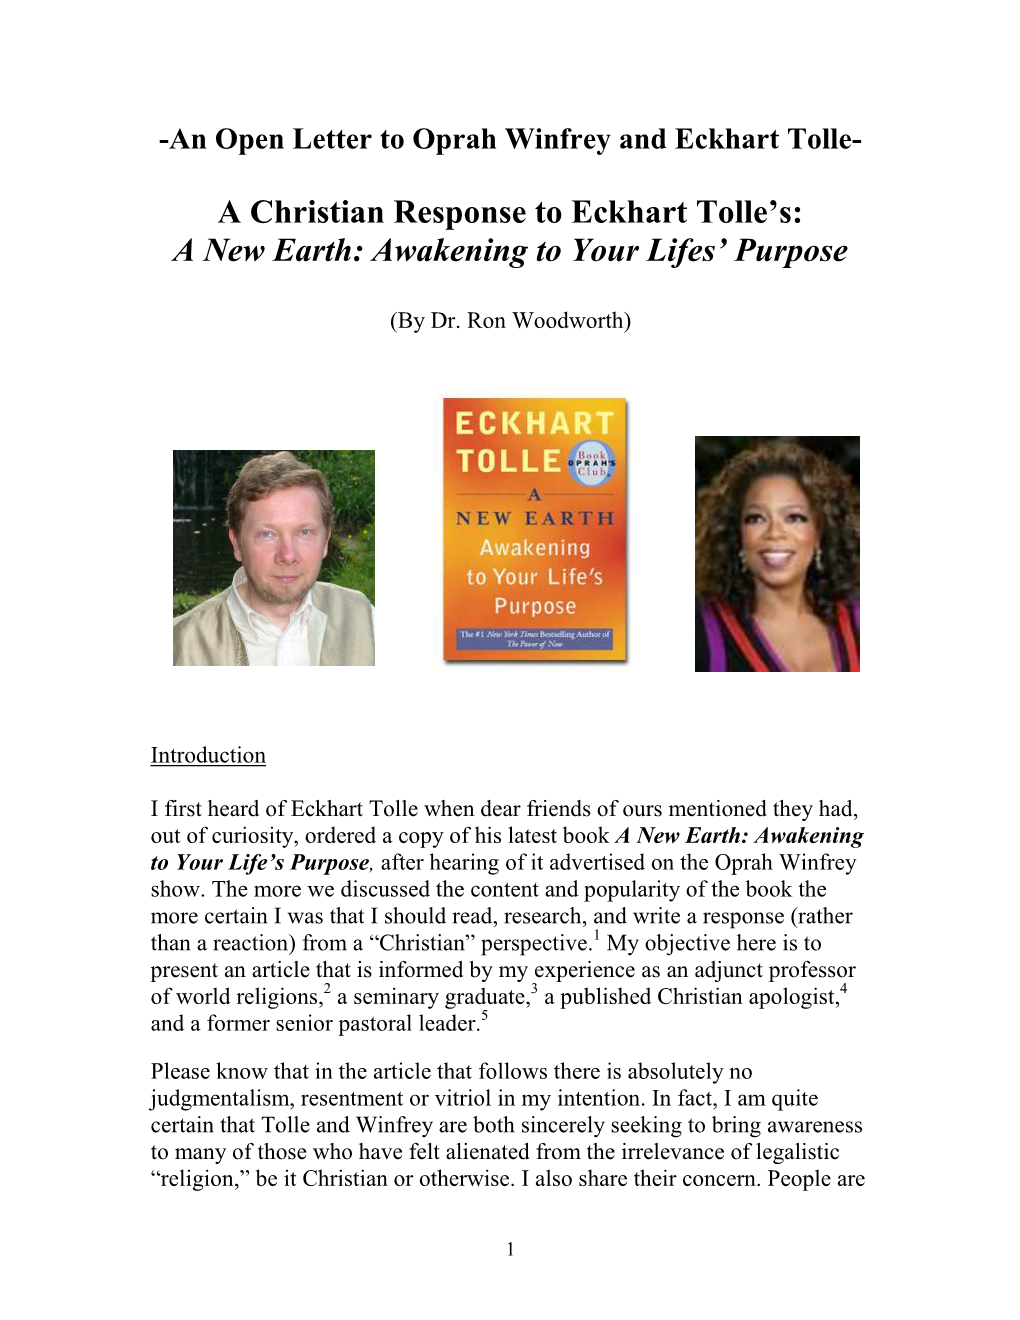 A Christian Response to Eckhart Tolle's: a New Earth: Awakening To